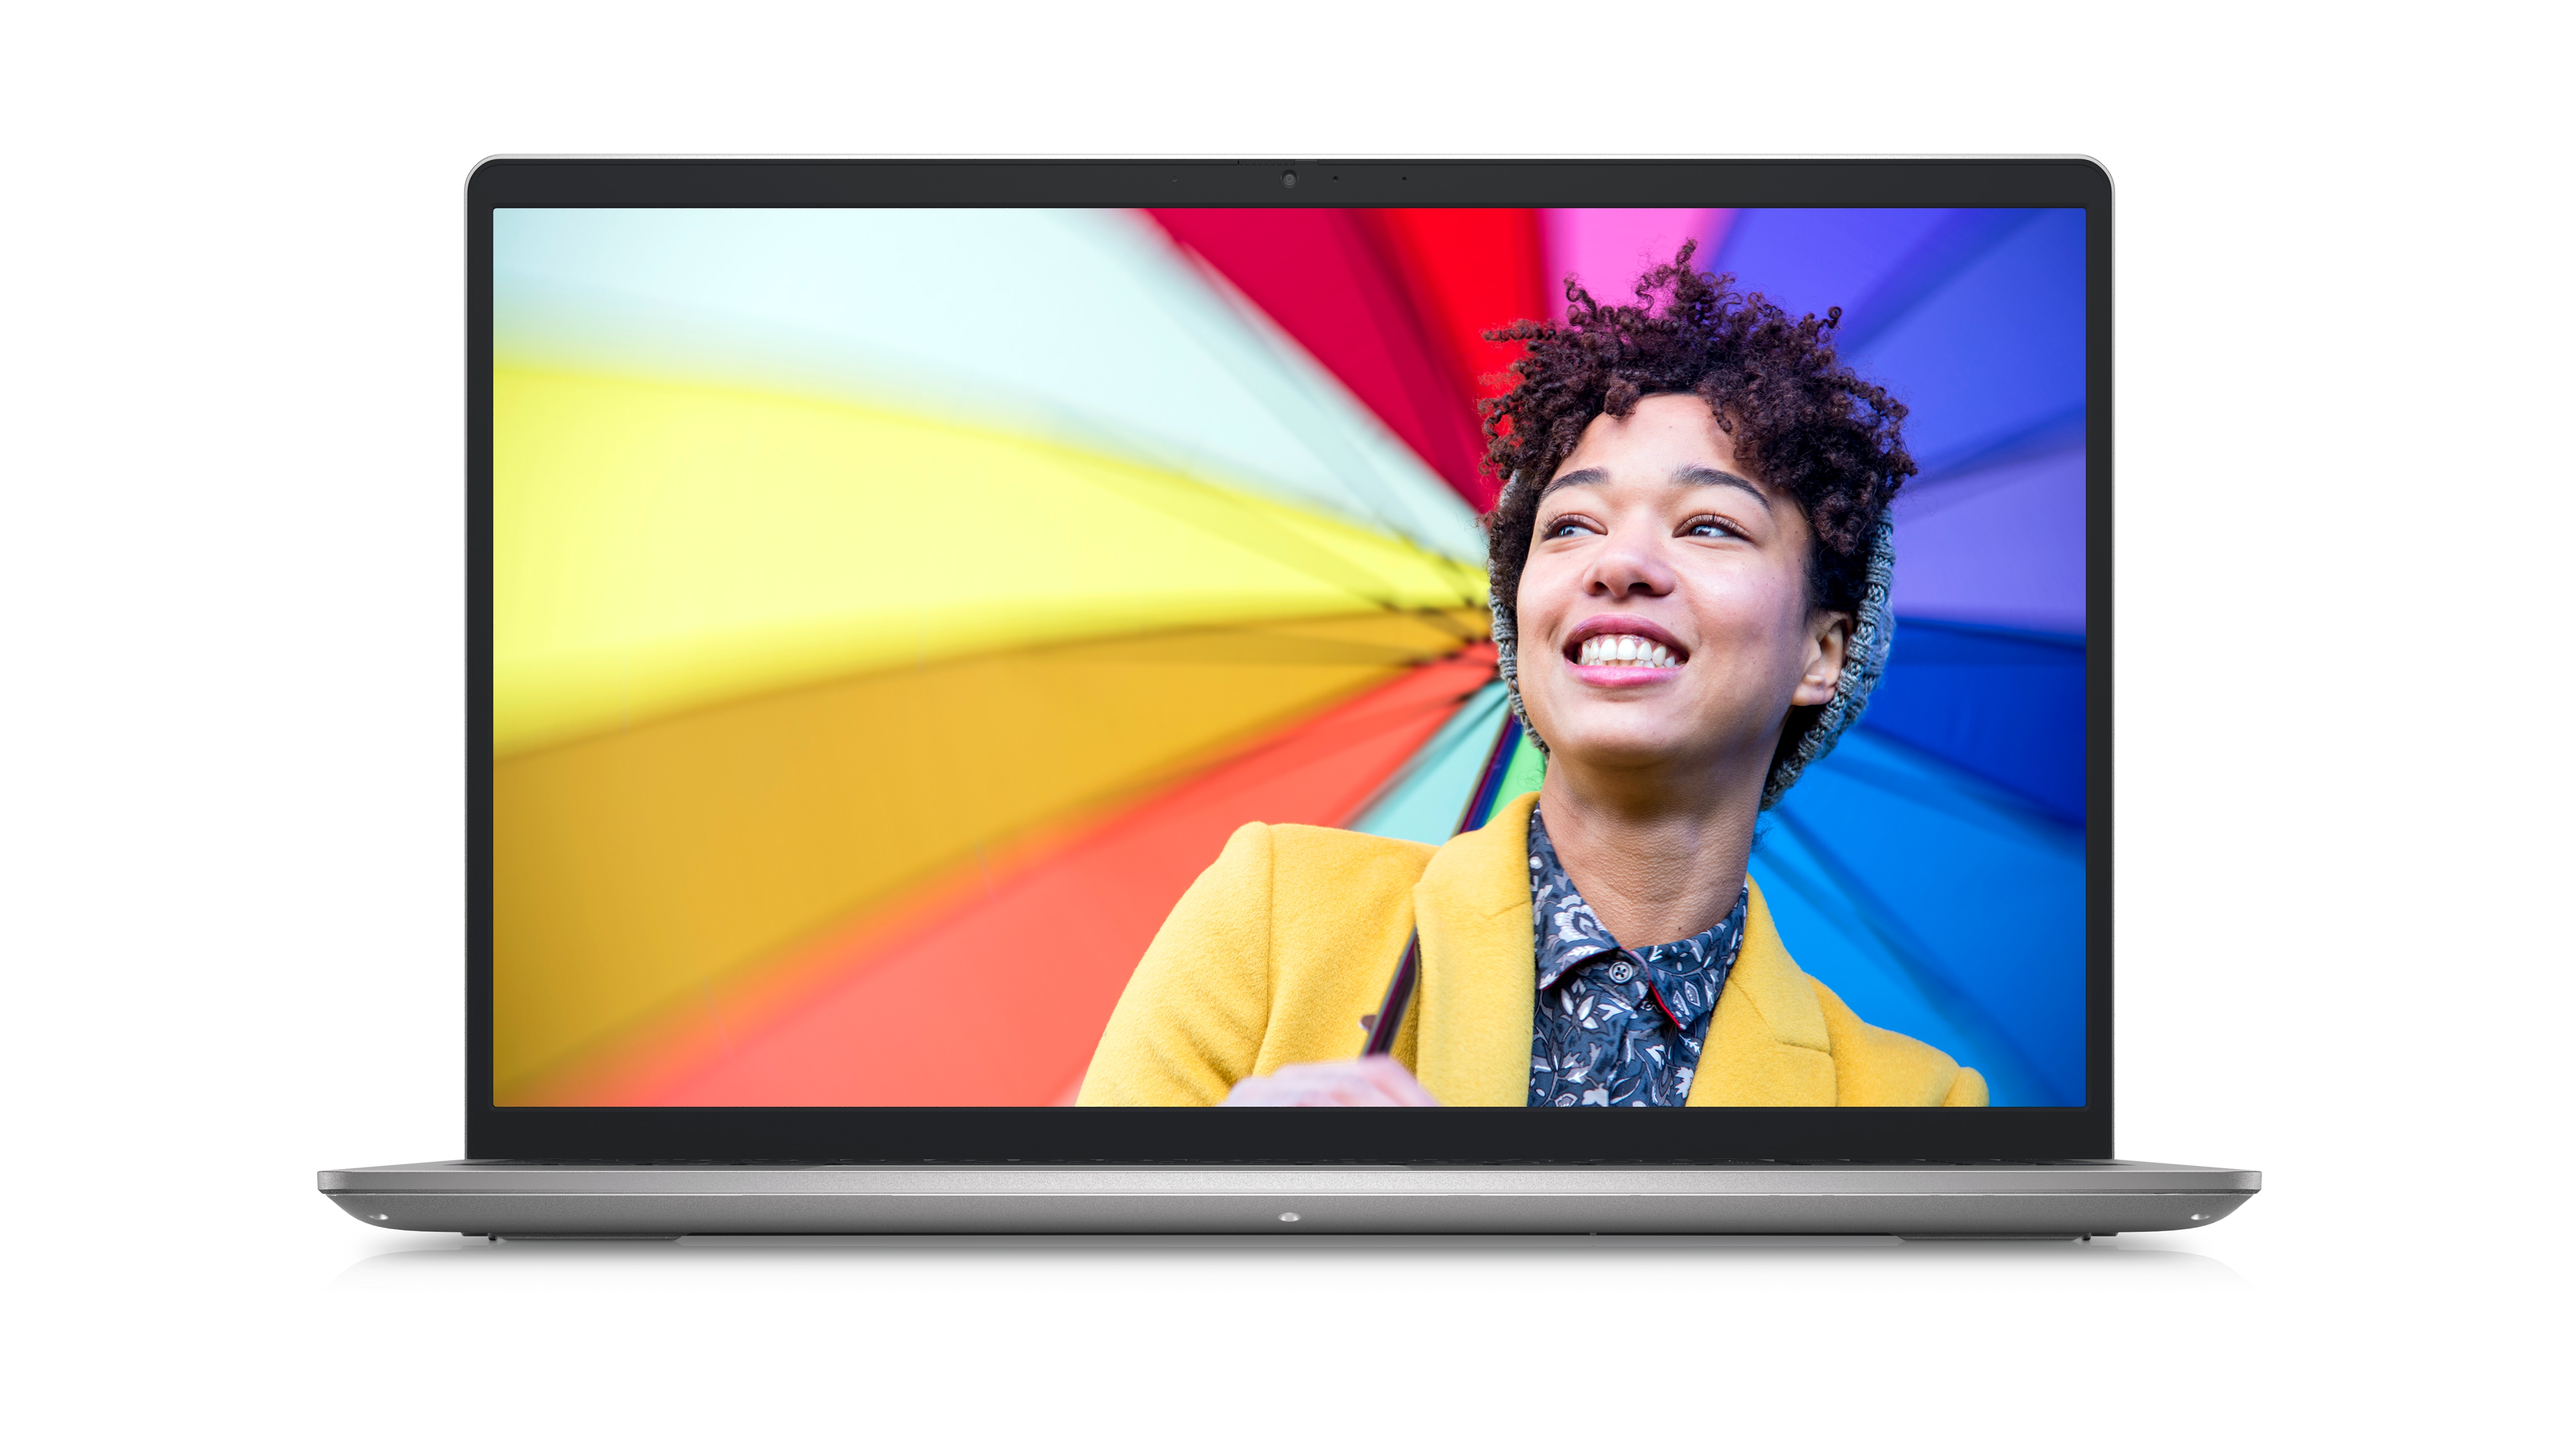 Picture of a Dell Inspiron 15 3525 Laptop with a smiley girl in a colorful background wearing a yellow blazer on the screen.